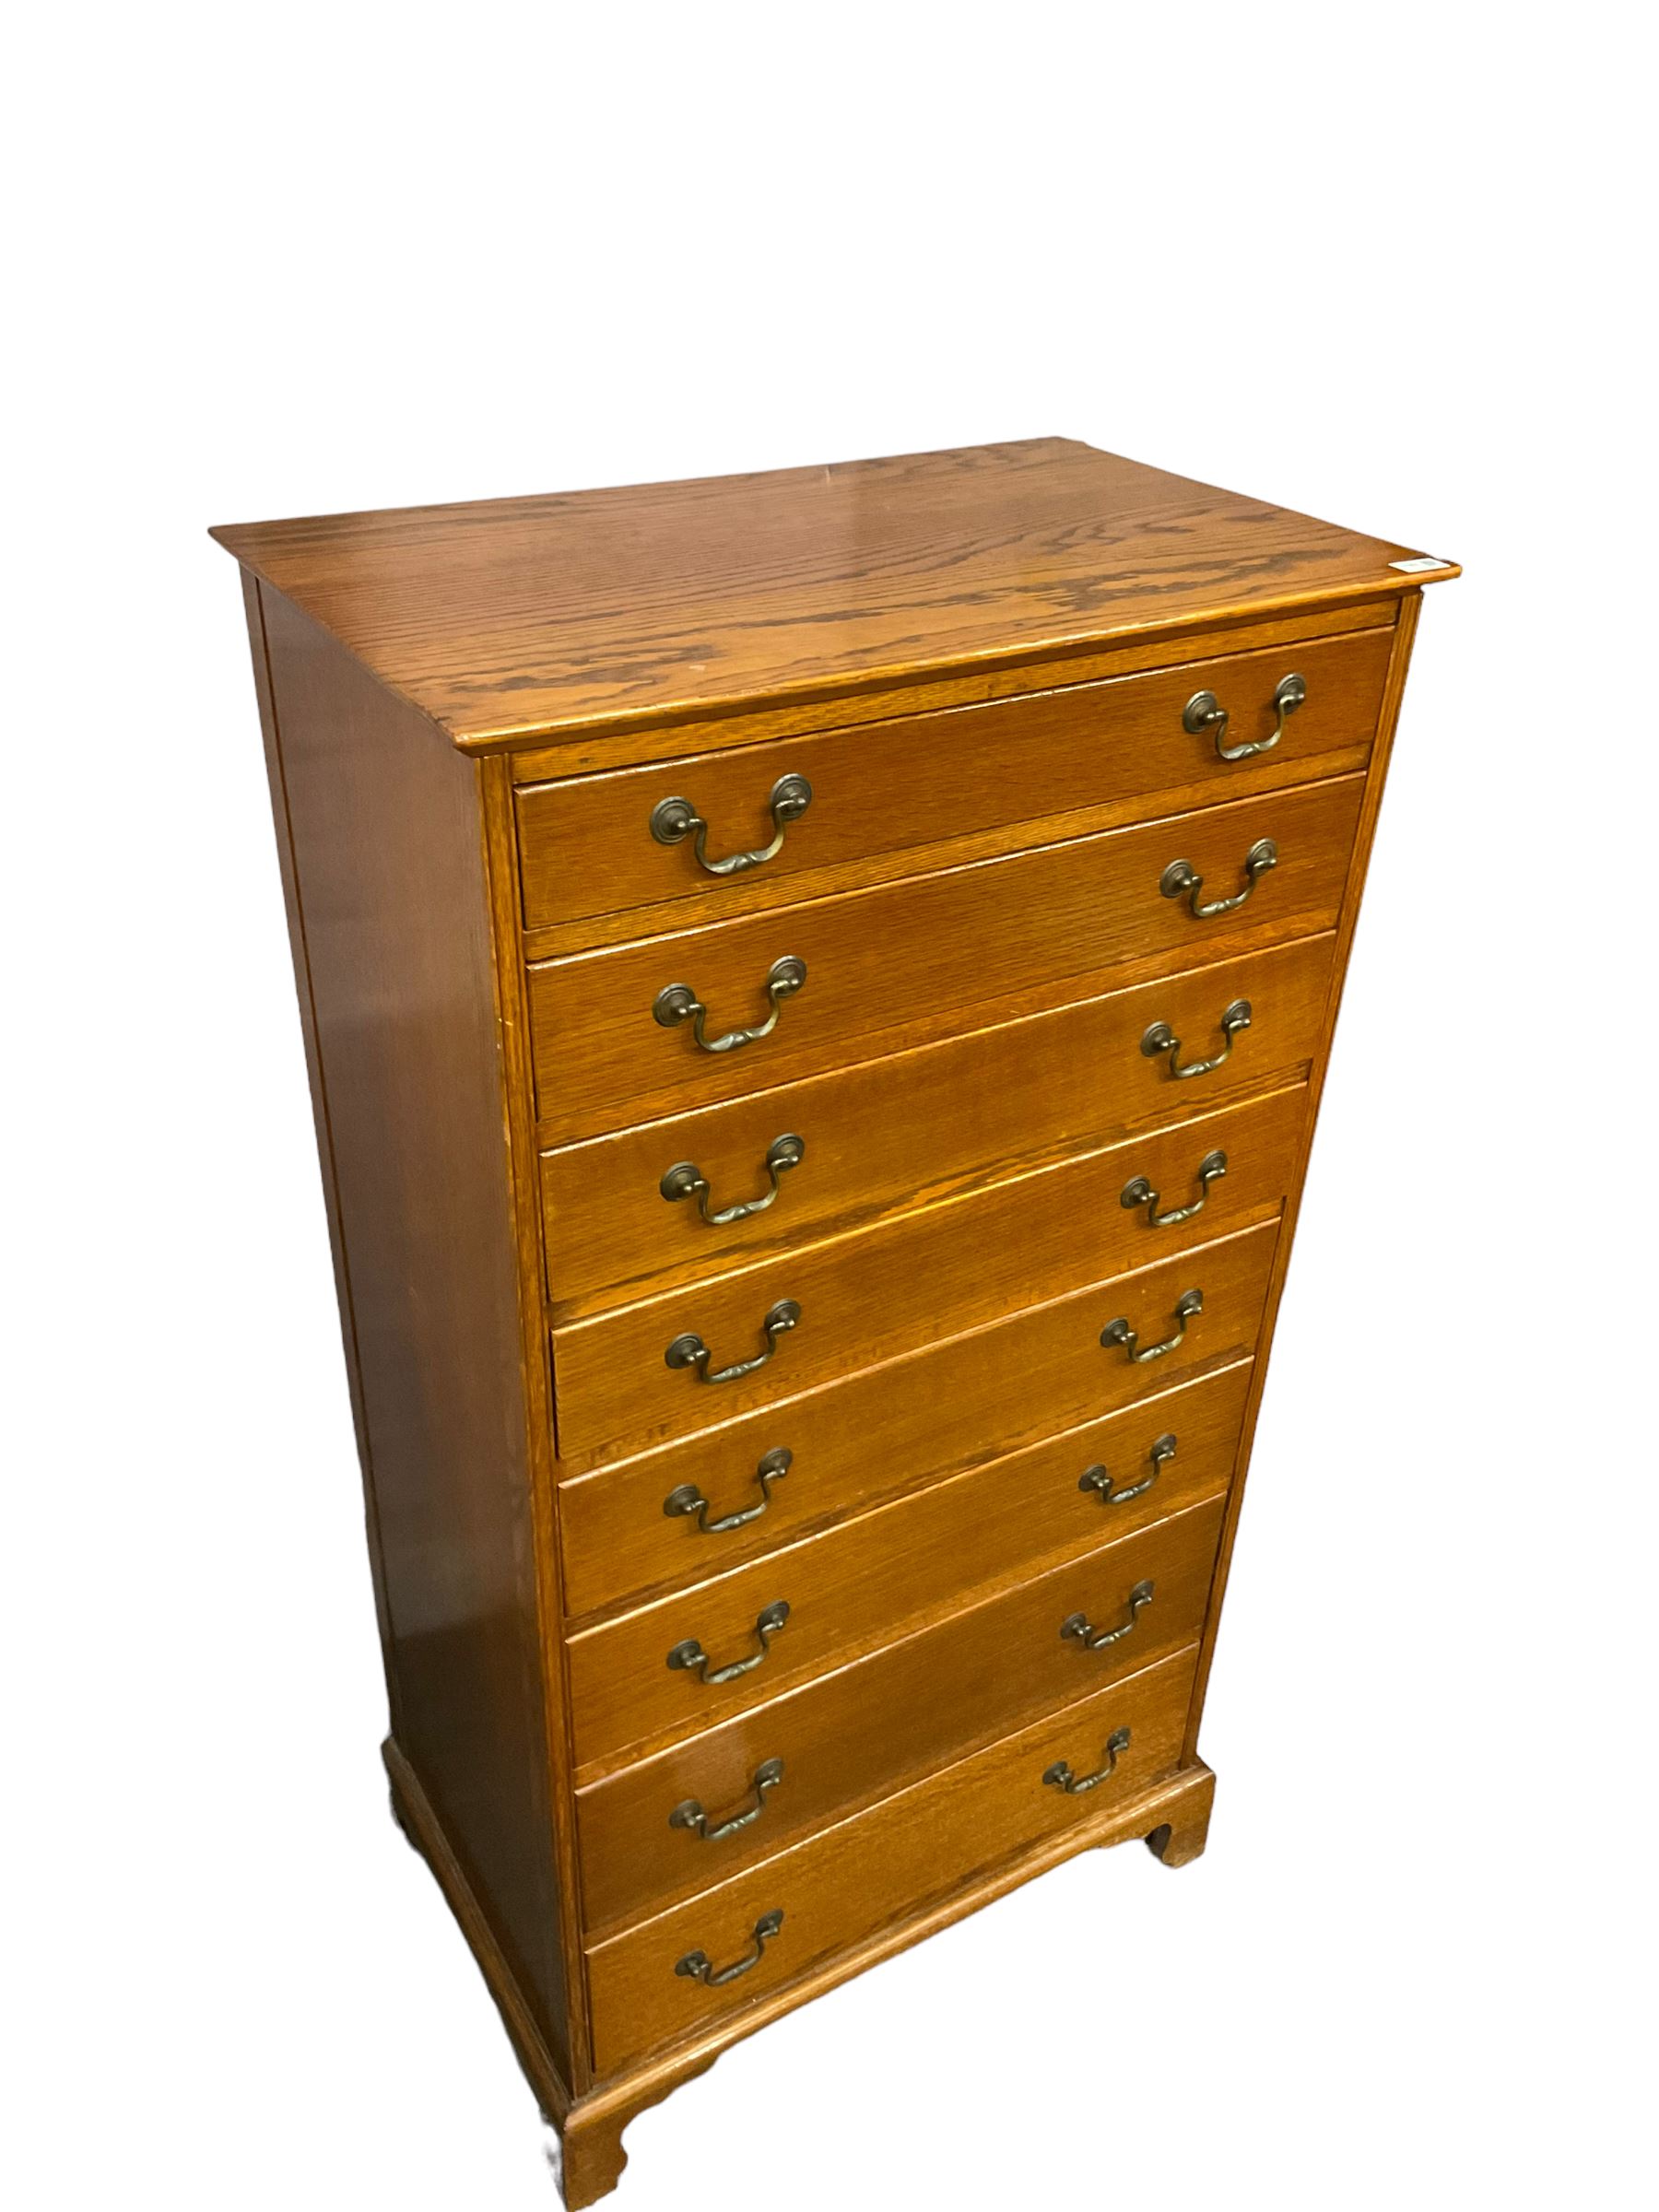 Mid-20th century oak straight-front chest - Image 3 of 5